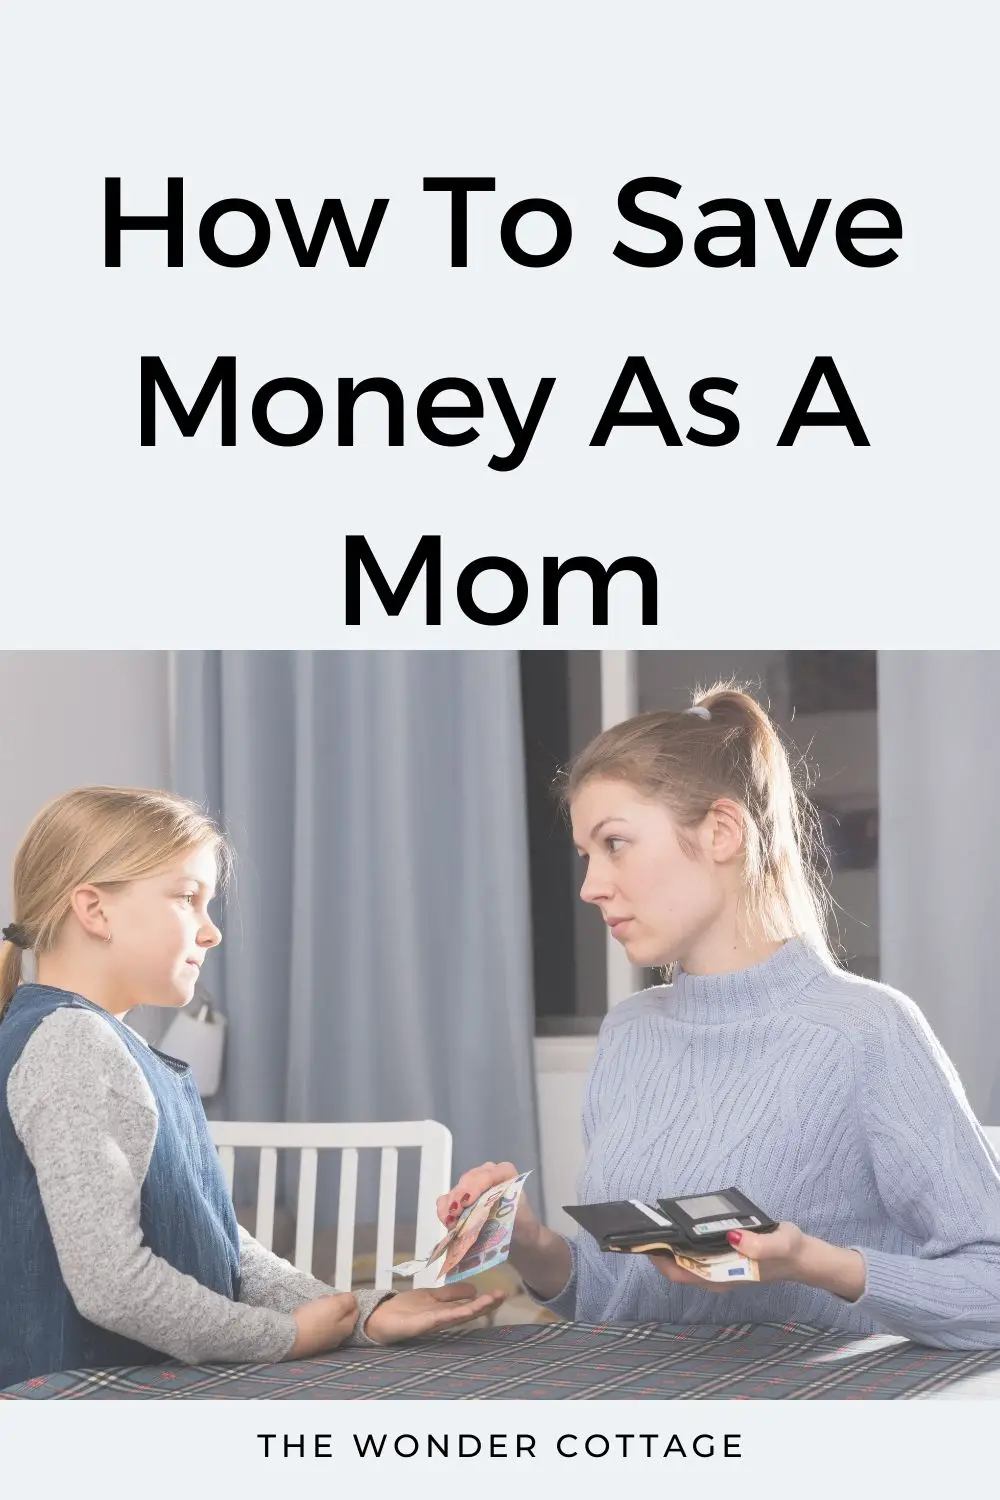 How to save money as a mom